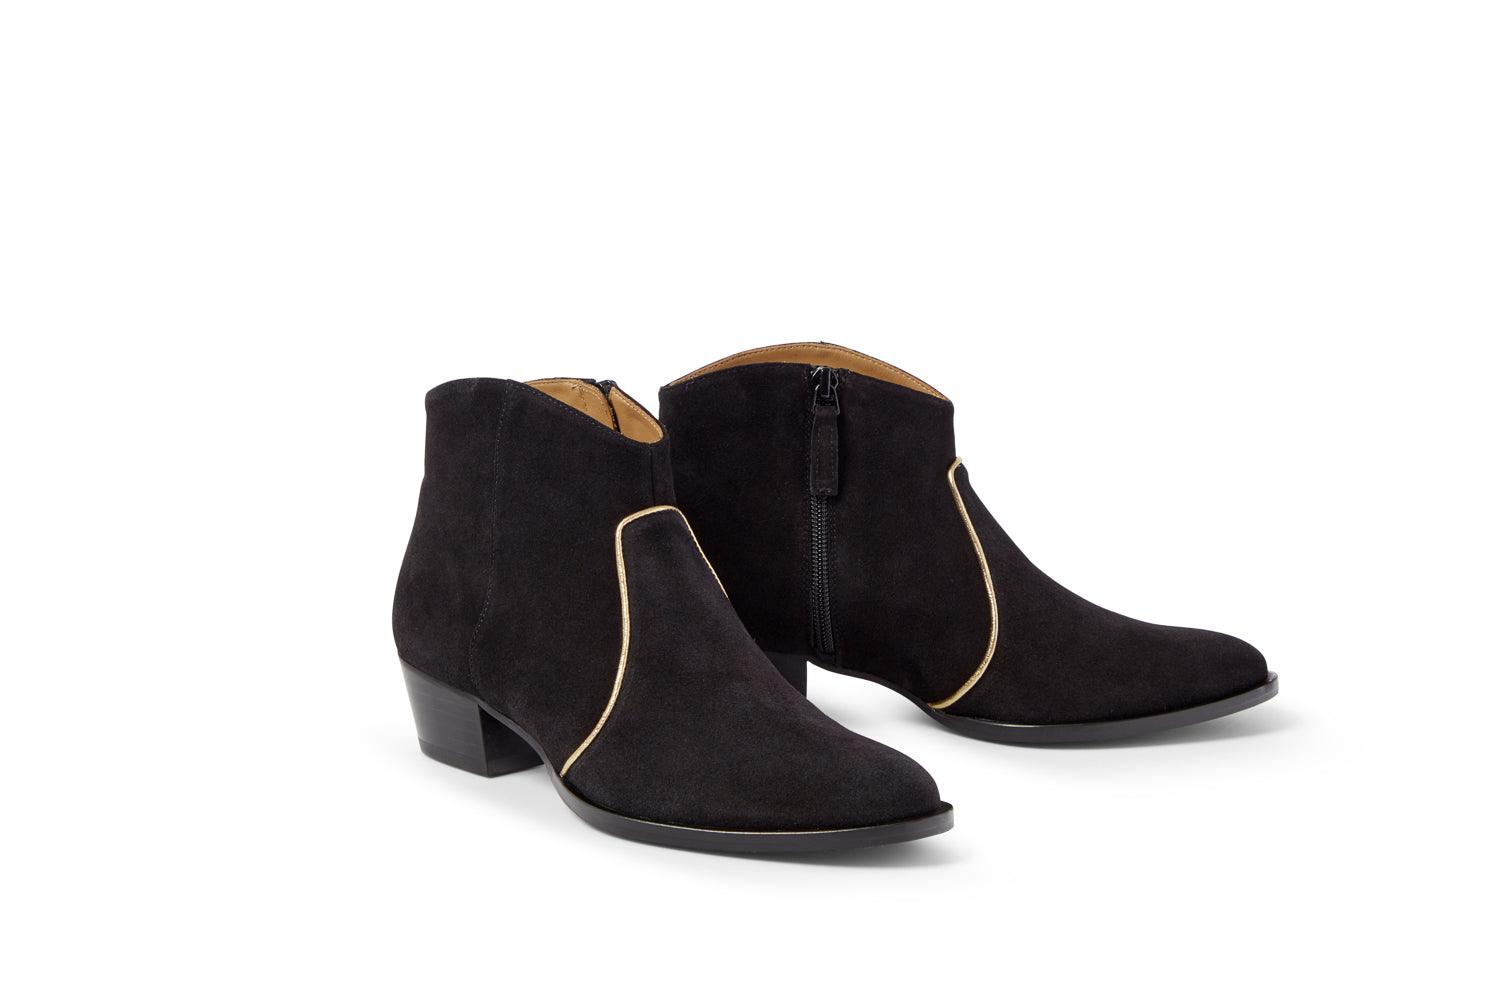 Dunn Black Suede Ankle Boot - MADE THE EDIT